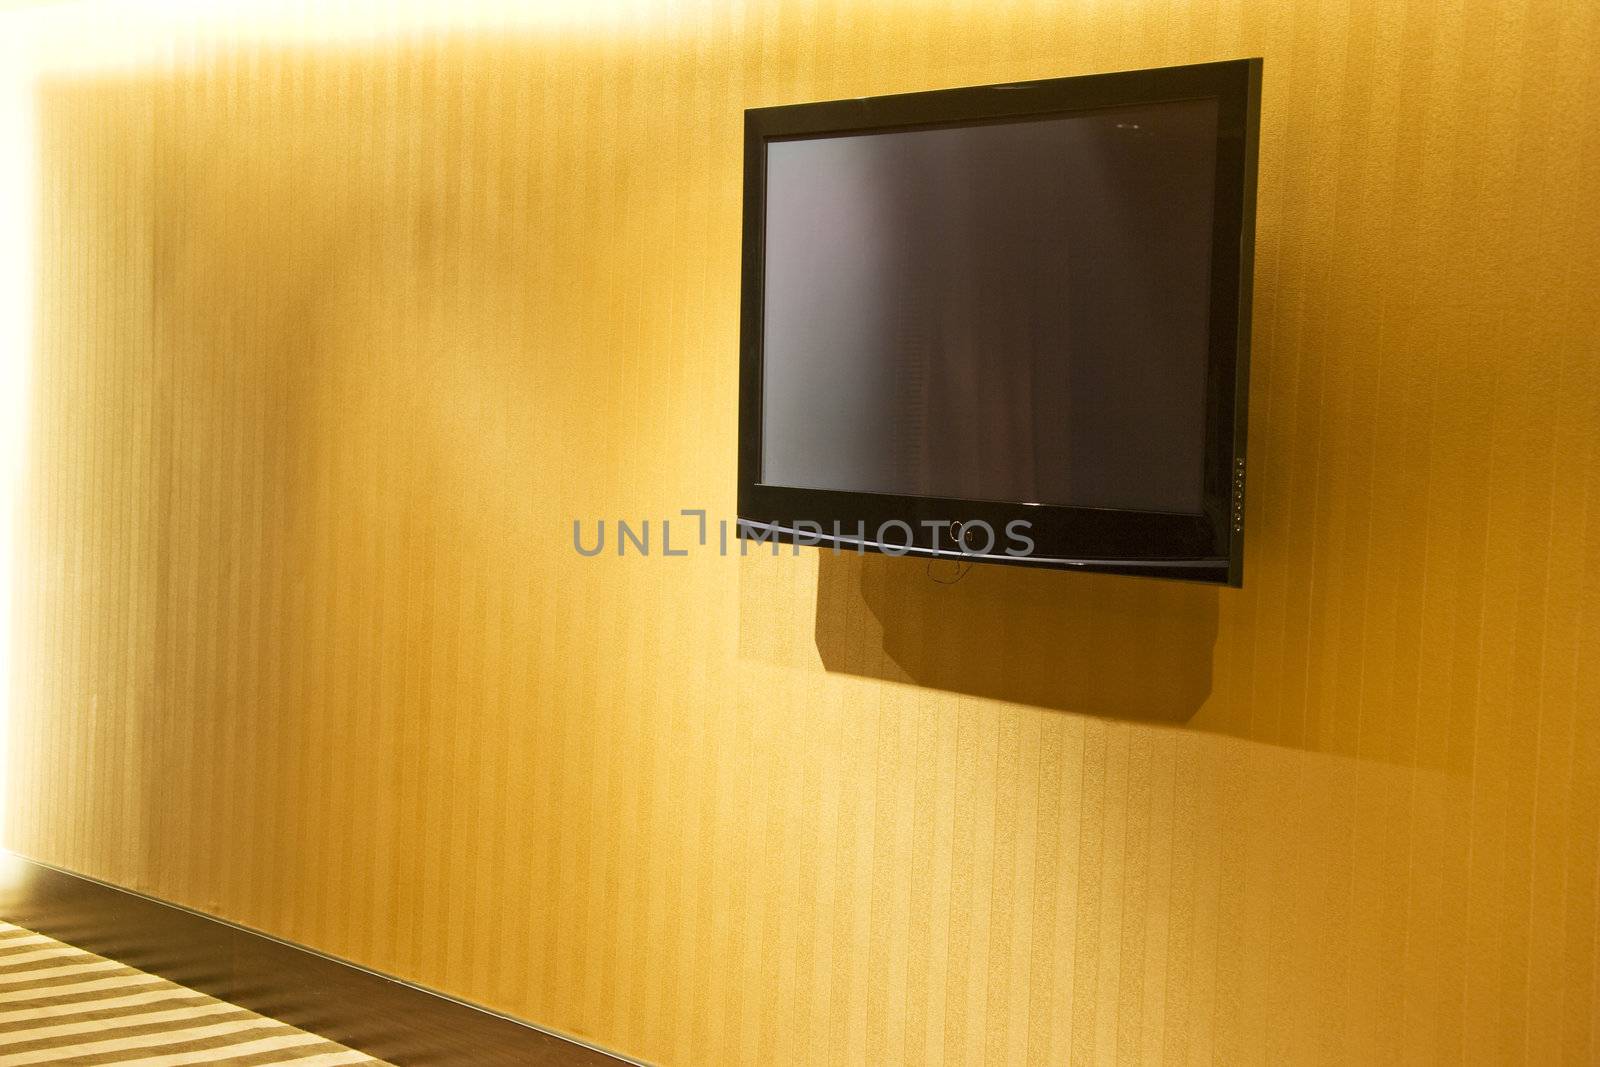 Image of a flat screen television mounted on a wall.